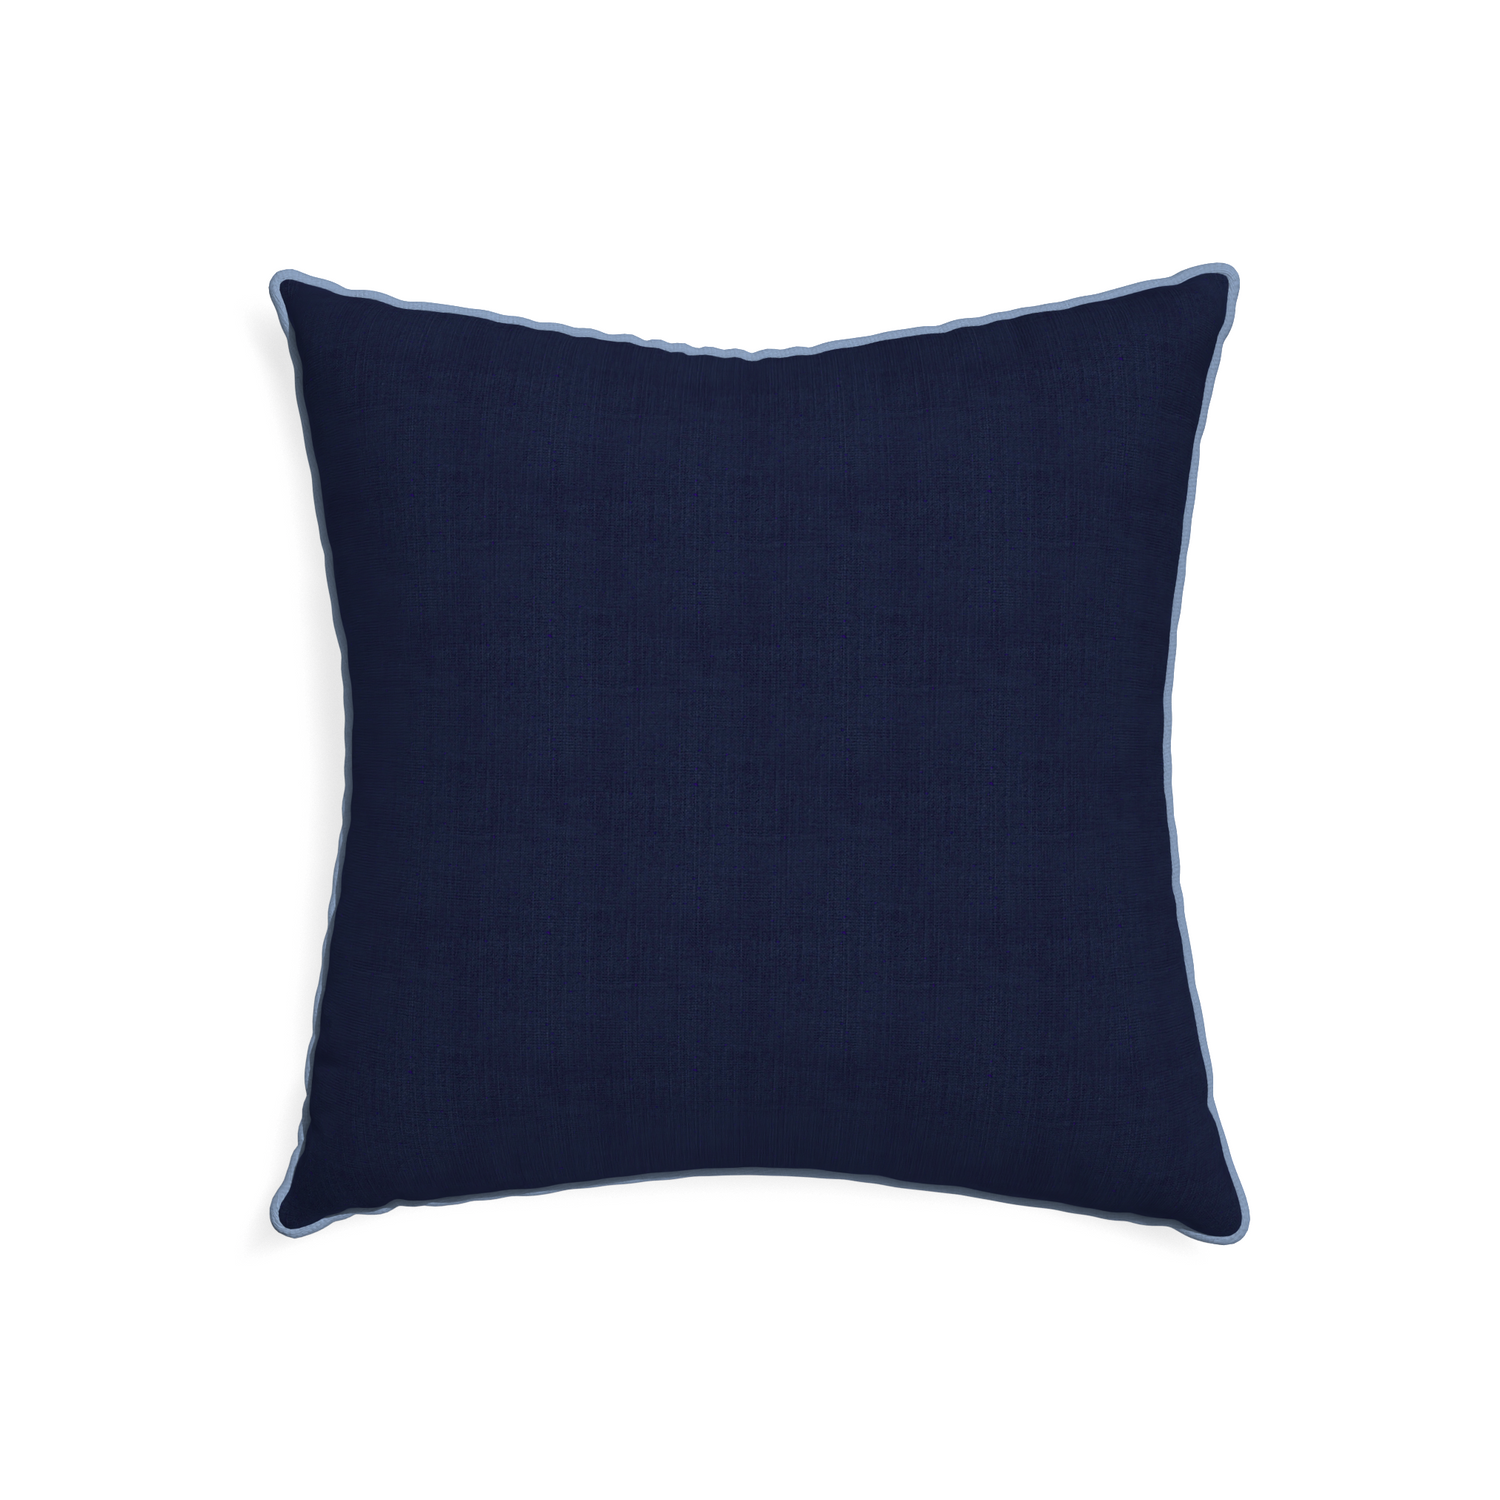 22-square midnight custom navy bluepillow with sky piping on white background